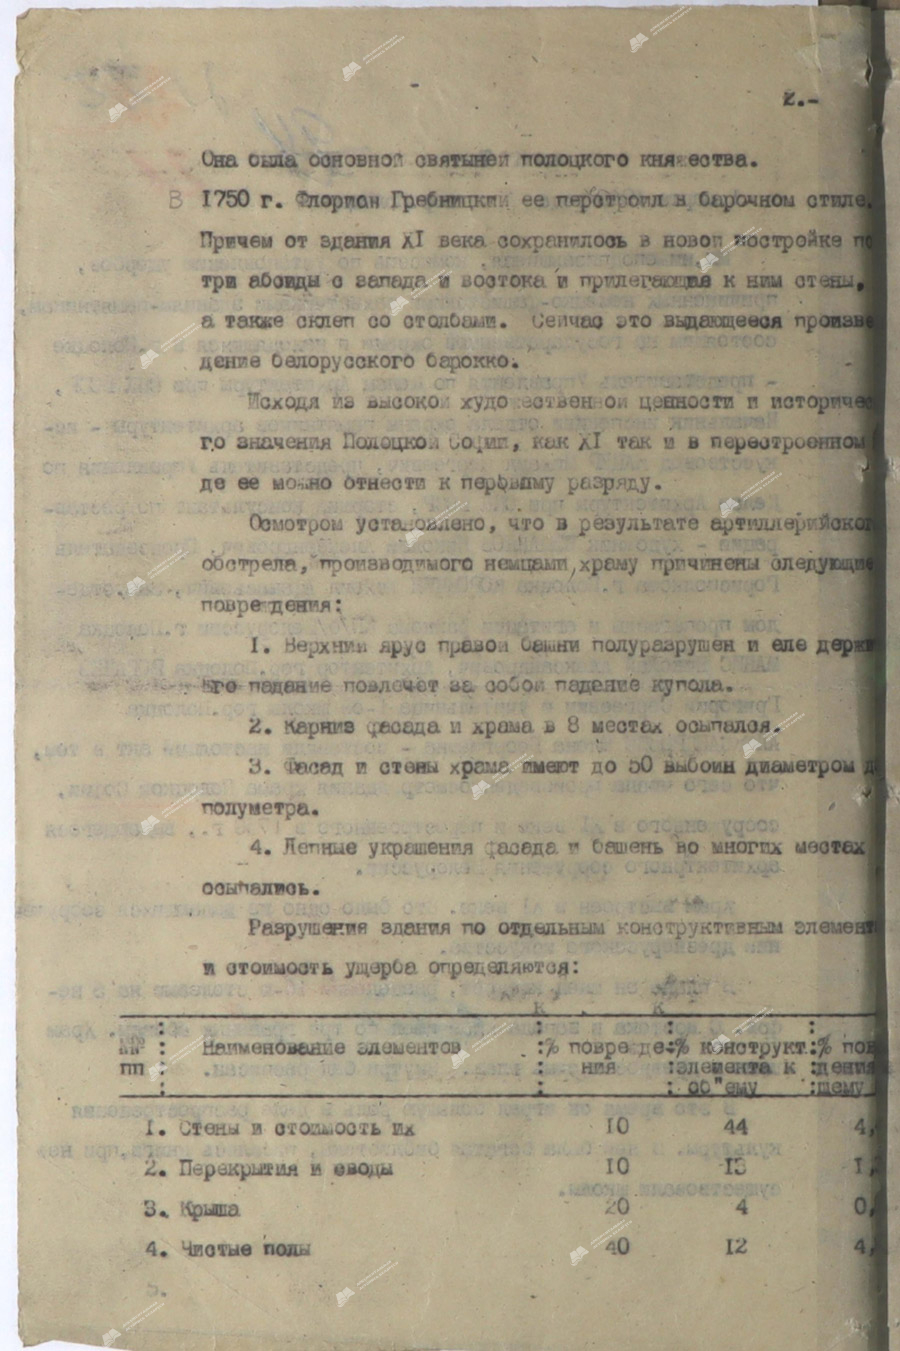 Acts of the commission of the Polotsk City Executive Committee to establish the damage caused by the Nazi invaders to the architectural monuments of Polotsk-стр. 3